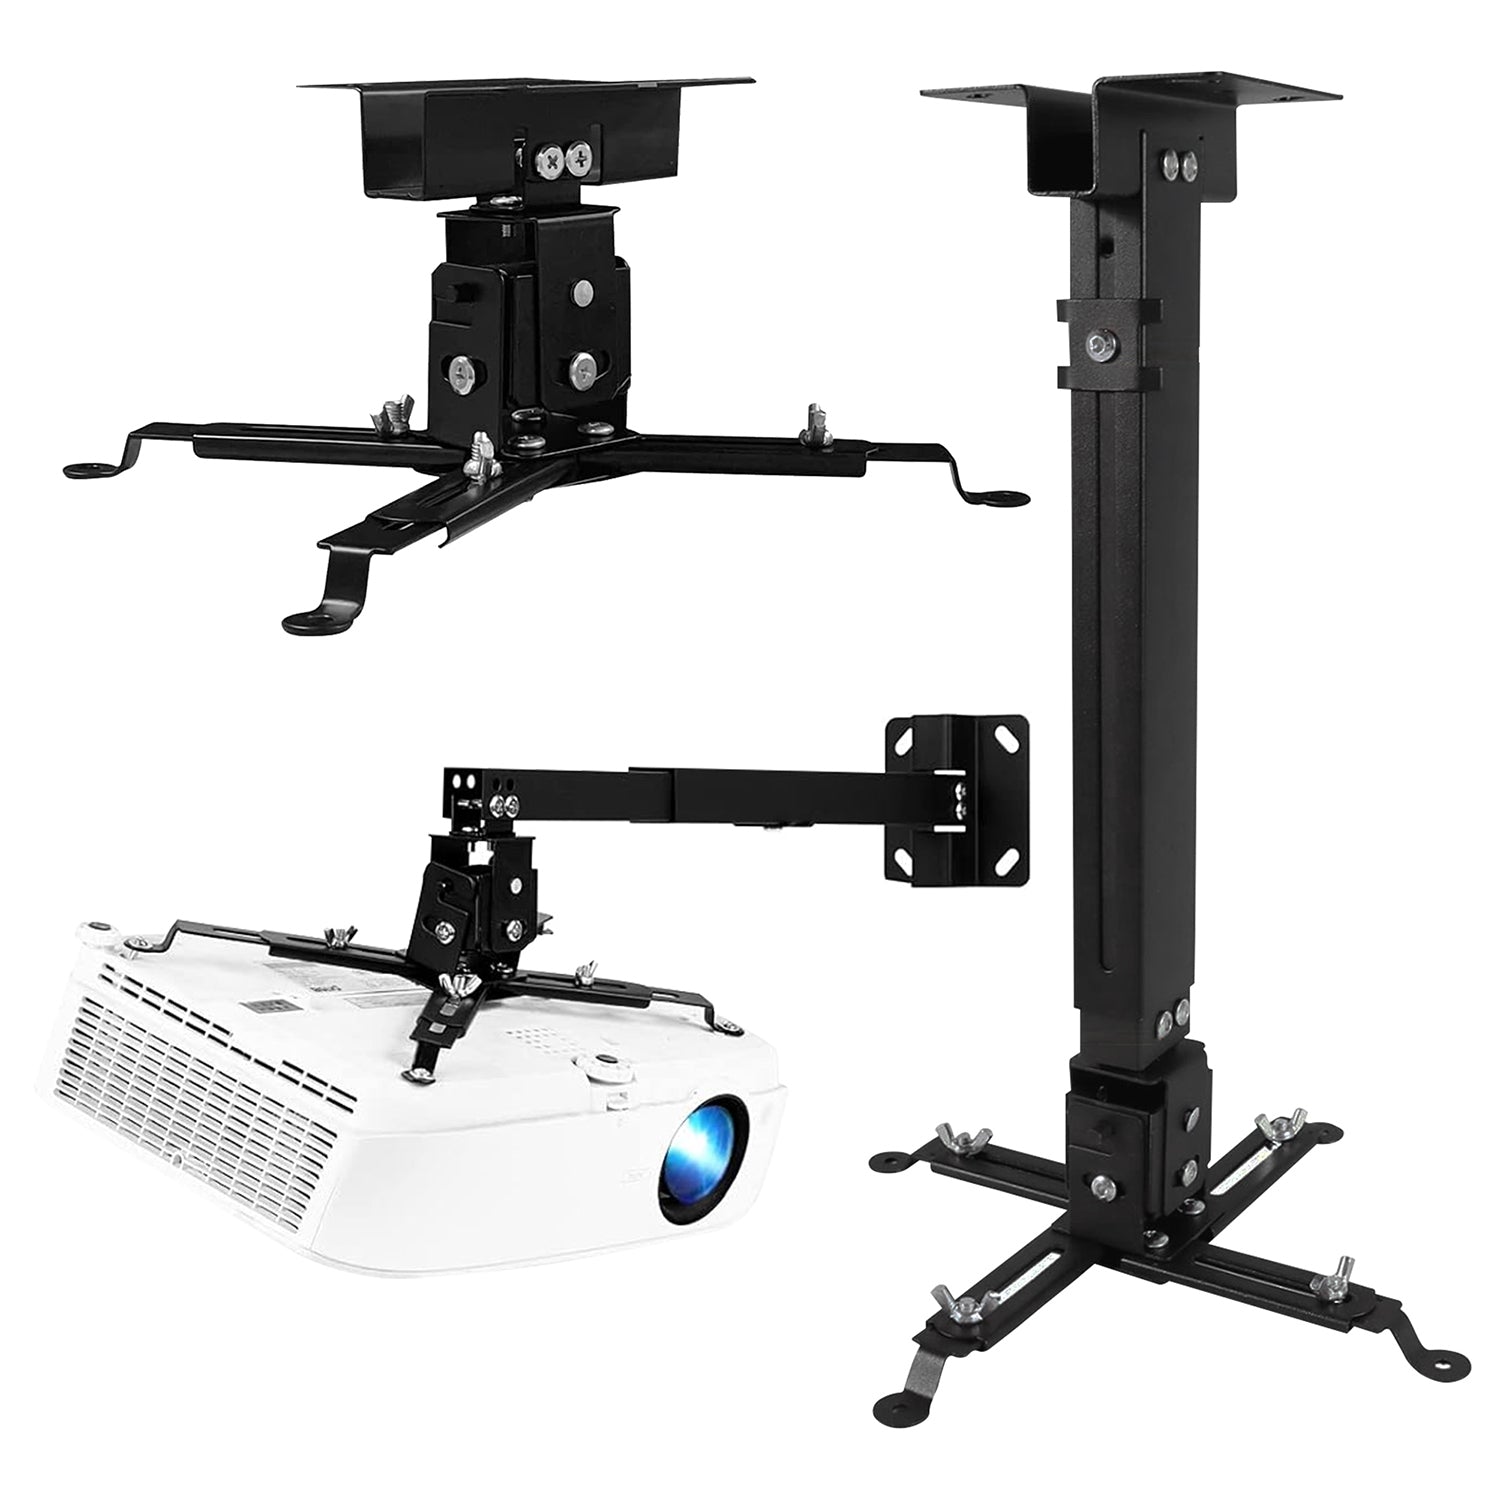 5Core Projector Ceiling Wall Mount Adjustable Low Profile Universal Projector Holder Capacity 40lb